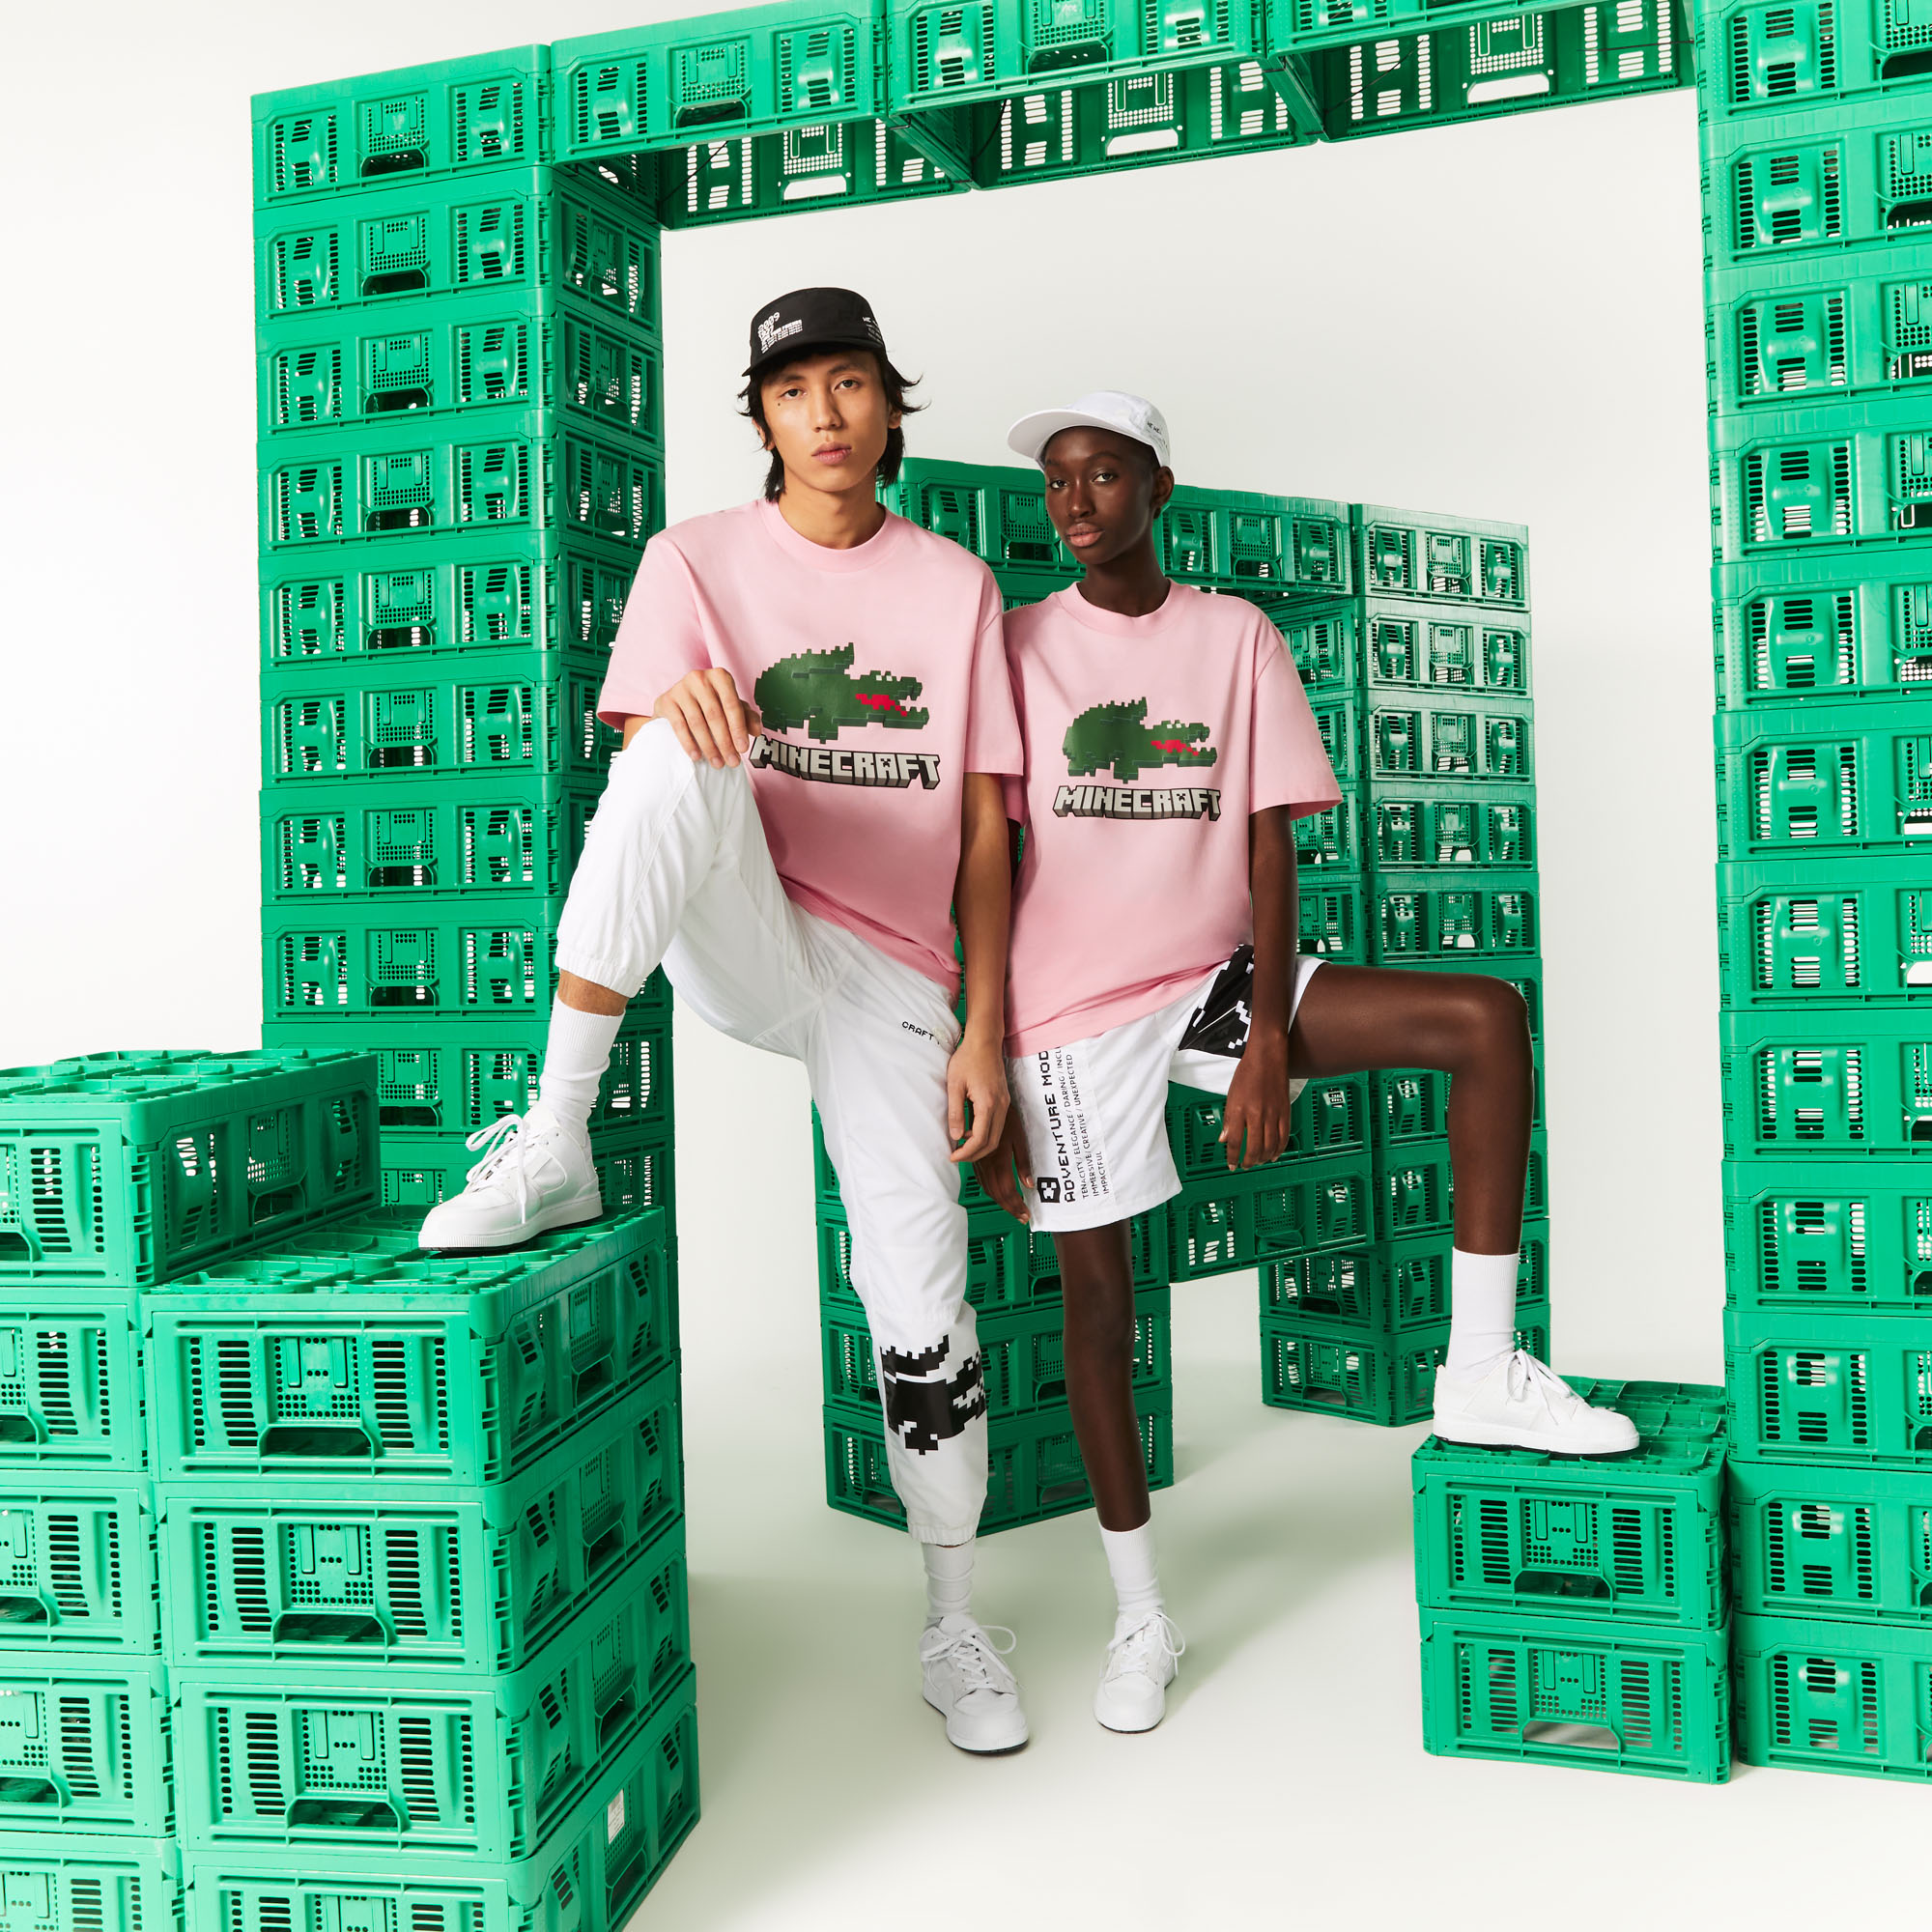 Lacoste and Minecraft unveil collaborative apparel collection